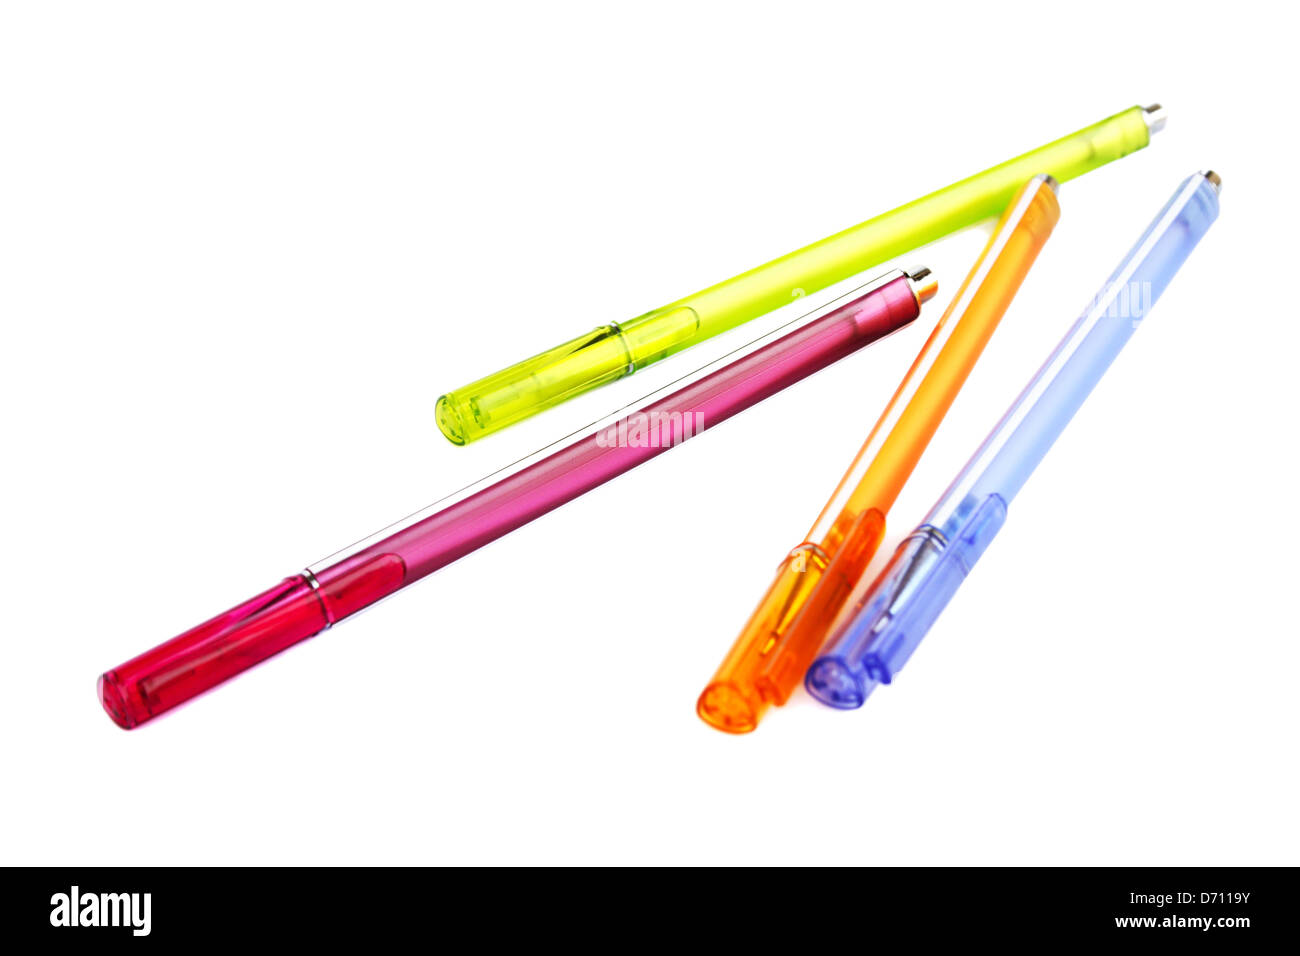 Colorful pens isolated on white background. Stock Photo